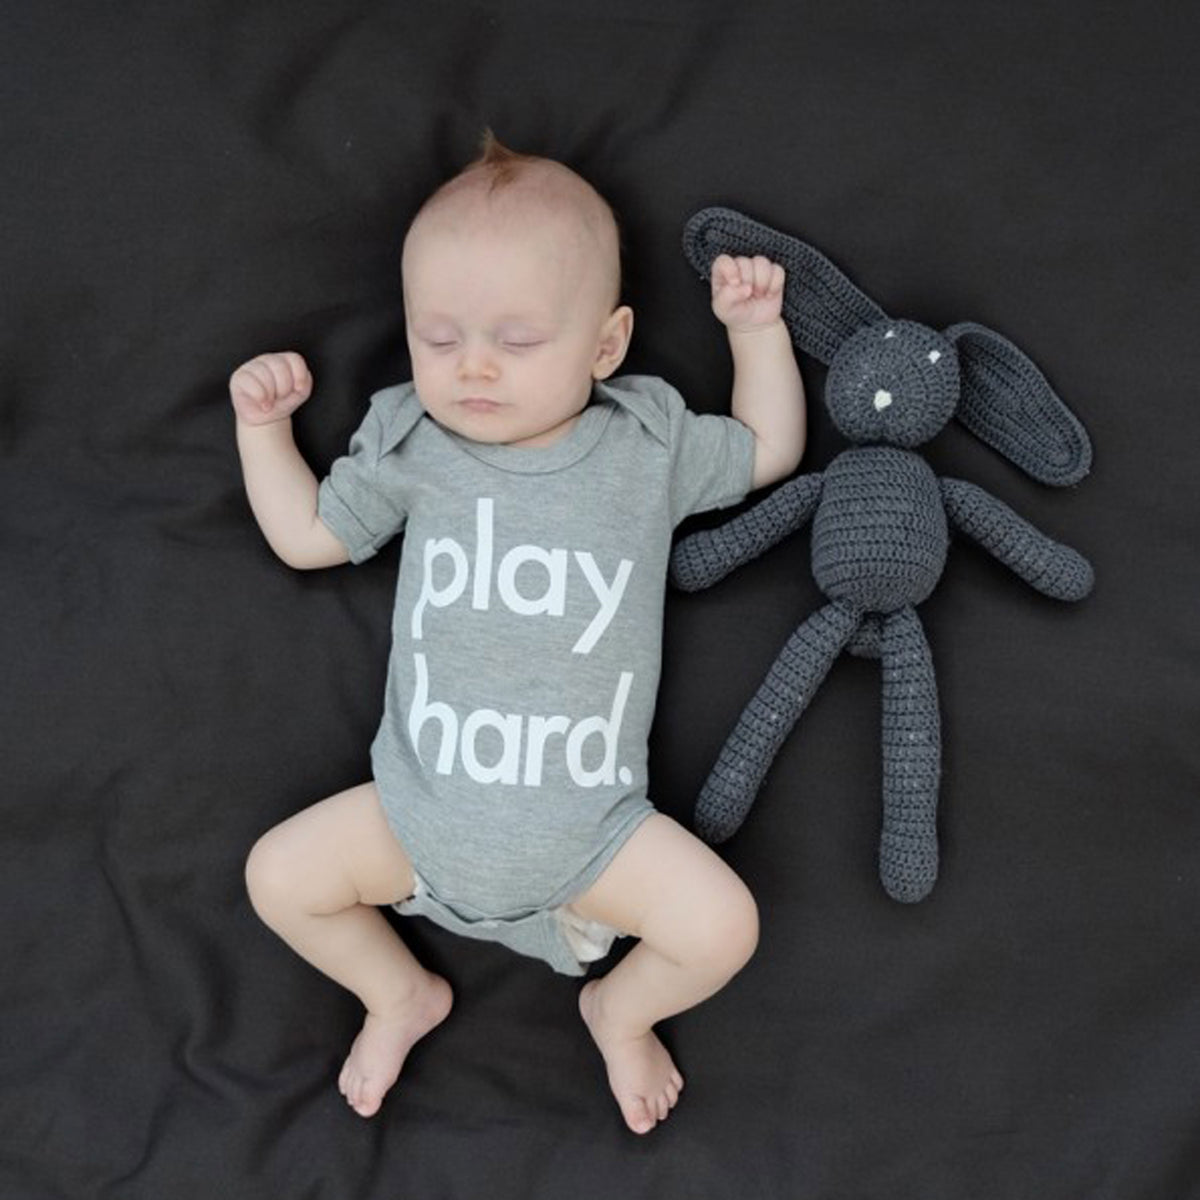 Baba Box Outlet - Play Hard bodysuit